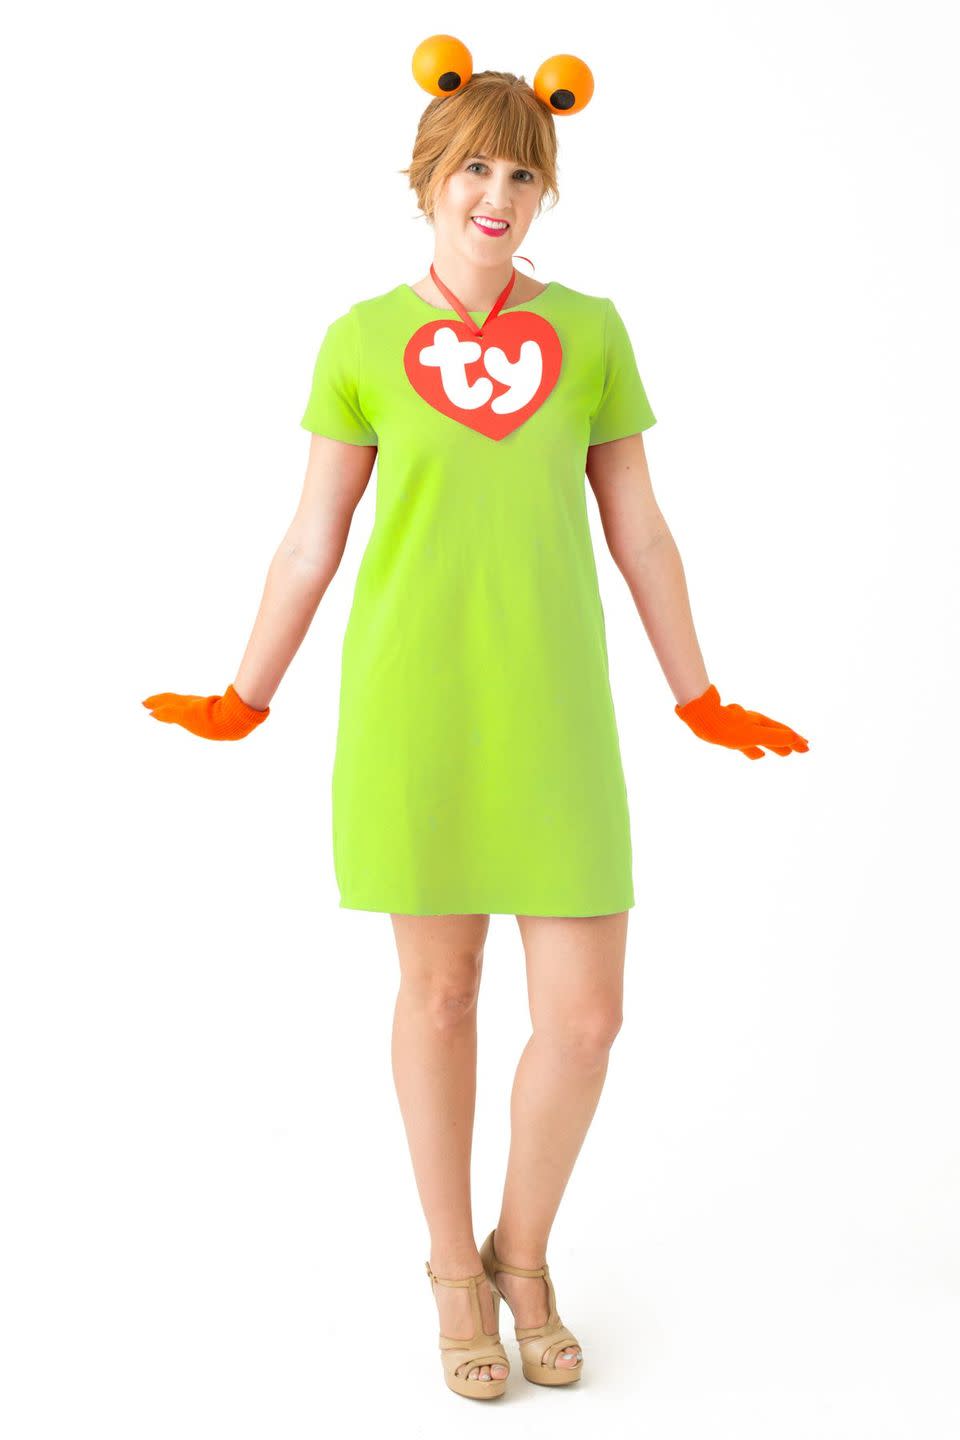 <p>Customize this costume by simply adding the "TY" tag to any outfit resembling your favorite beanie baby toy. </p><p>Get the <strong><a href="https://studiodiy.com/diy-90s-toys-costumes//" rel="nofollow noopener" target="_blank" data-ylk="slk:Beanie Baby Costume tutorial" class="link ">Beanie Baby Costume tutorial</a></strong> at Studio DIY. </p>